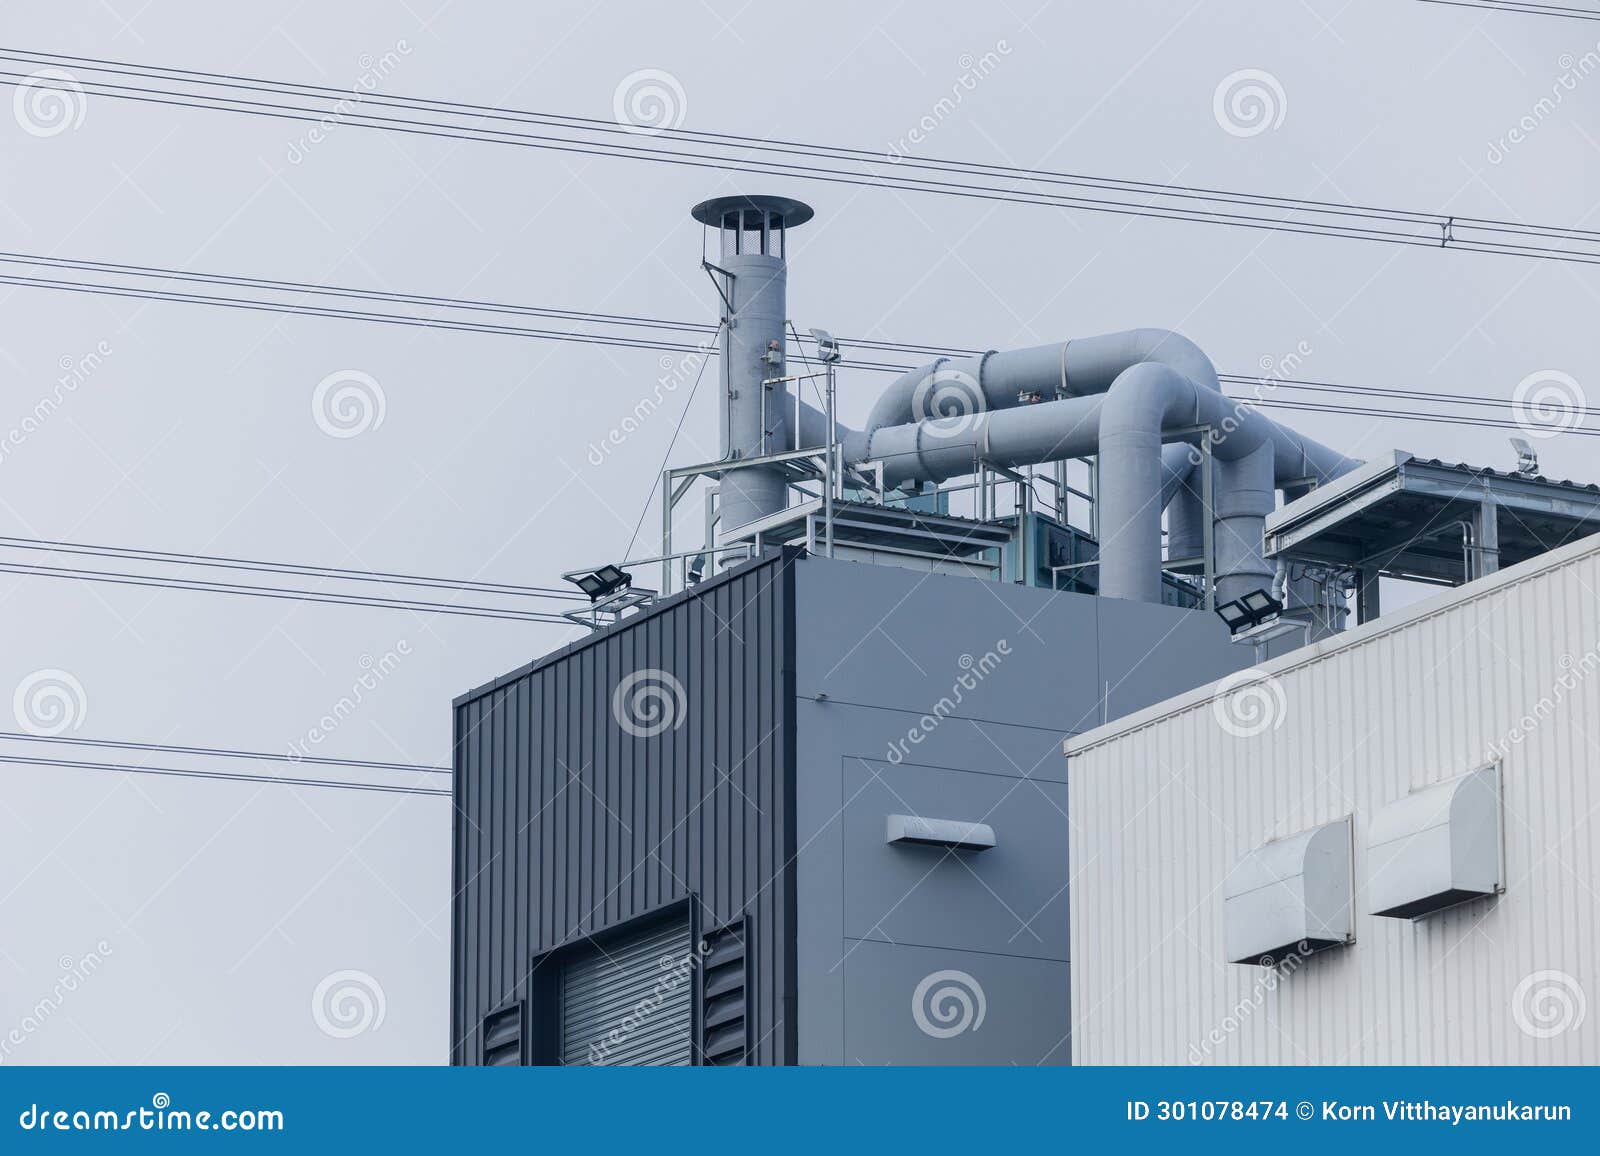 air ventilate pipe on building roof top modern metro urban iconic cityscape scene